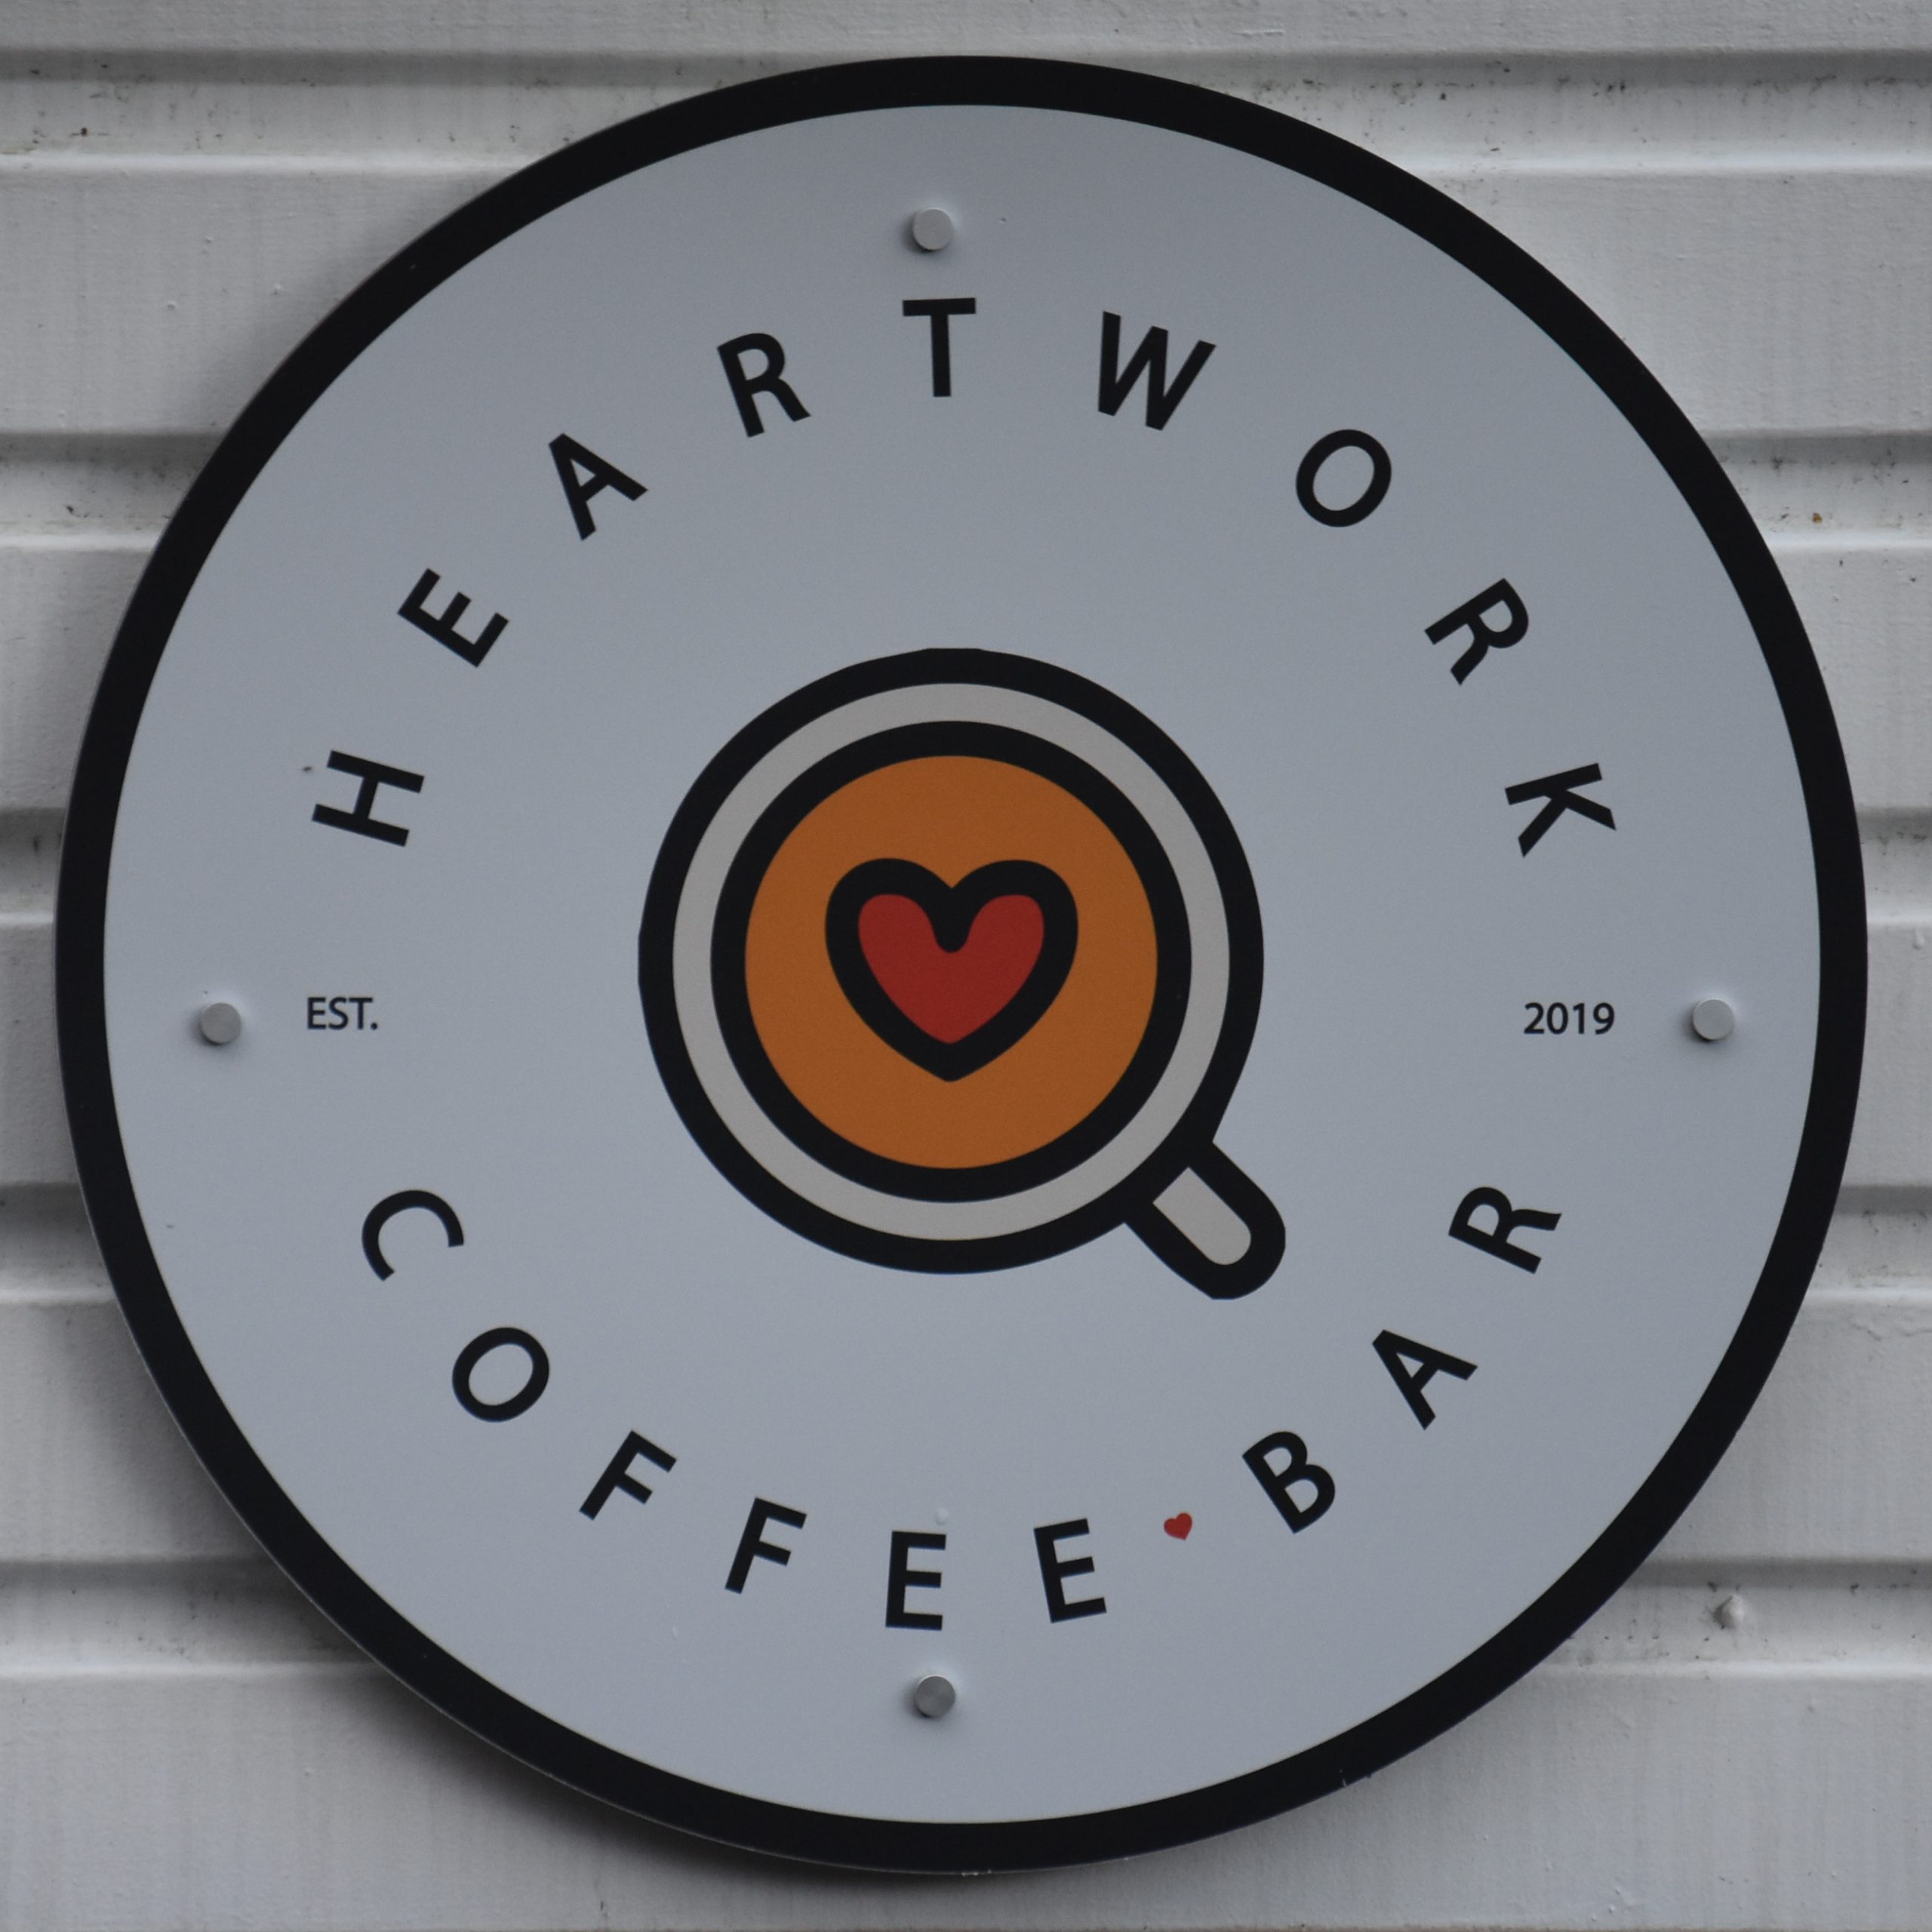 The Heartwork Coffee Bar logo from the side of the horsebox which acts as the coffee bar.